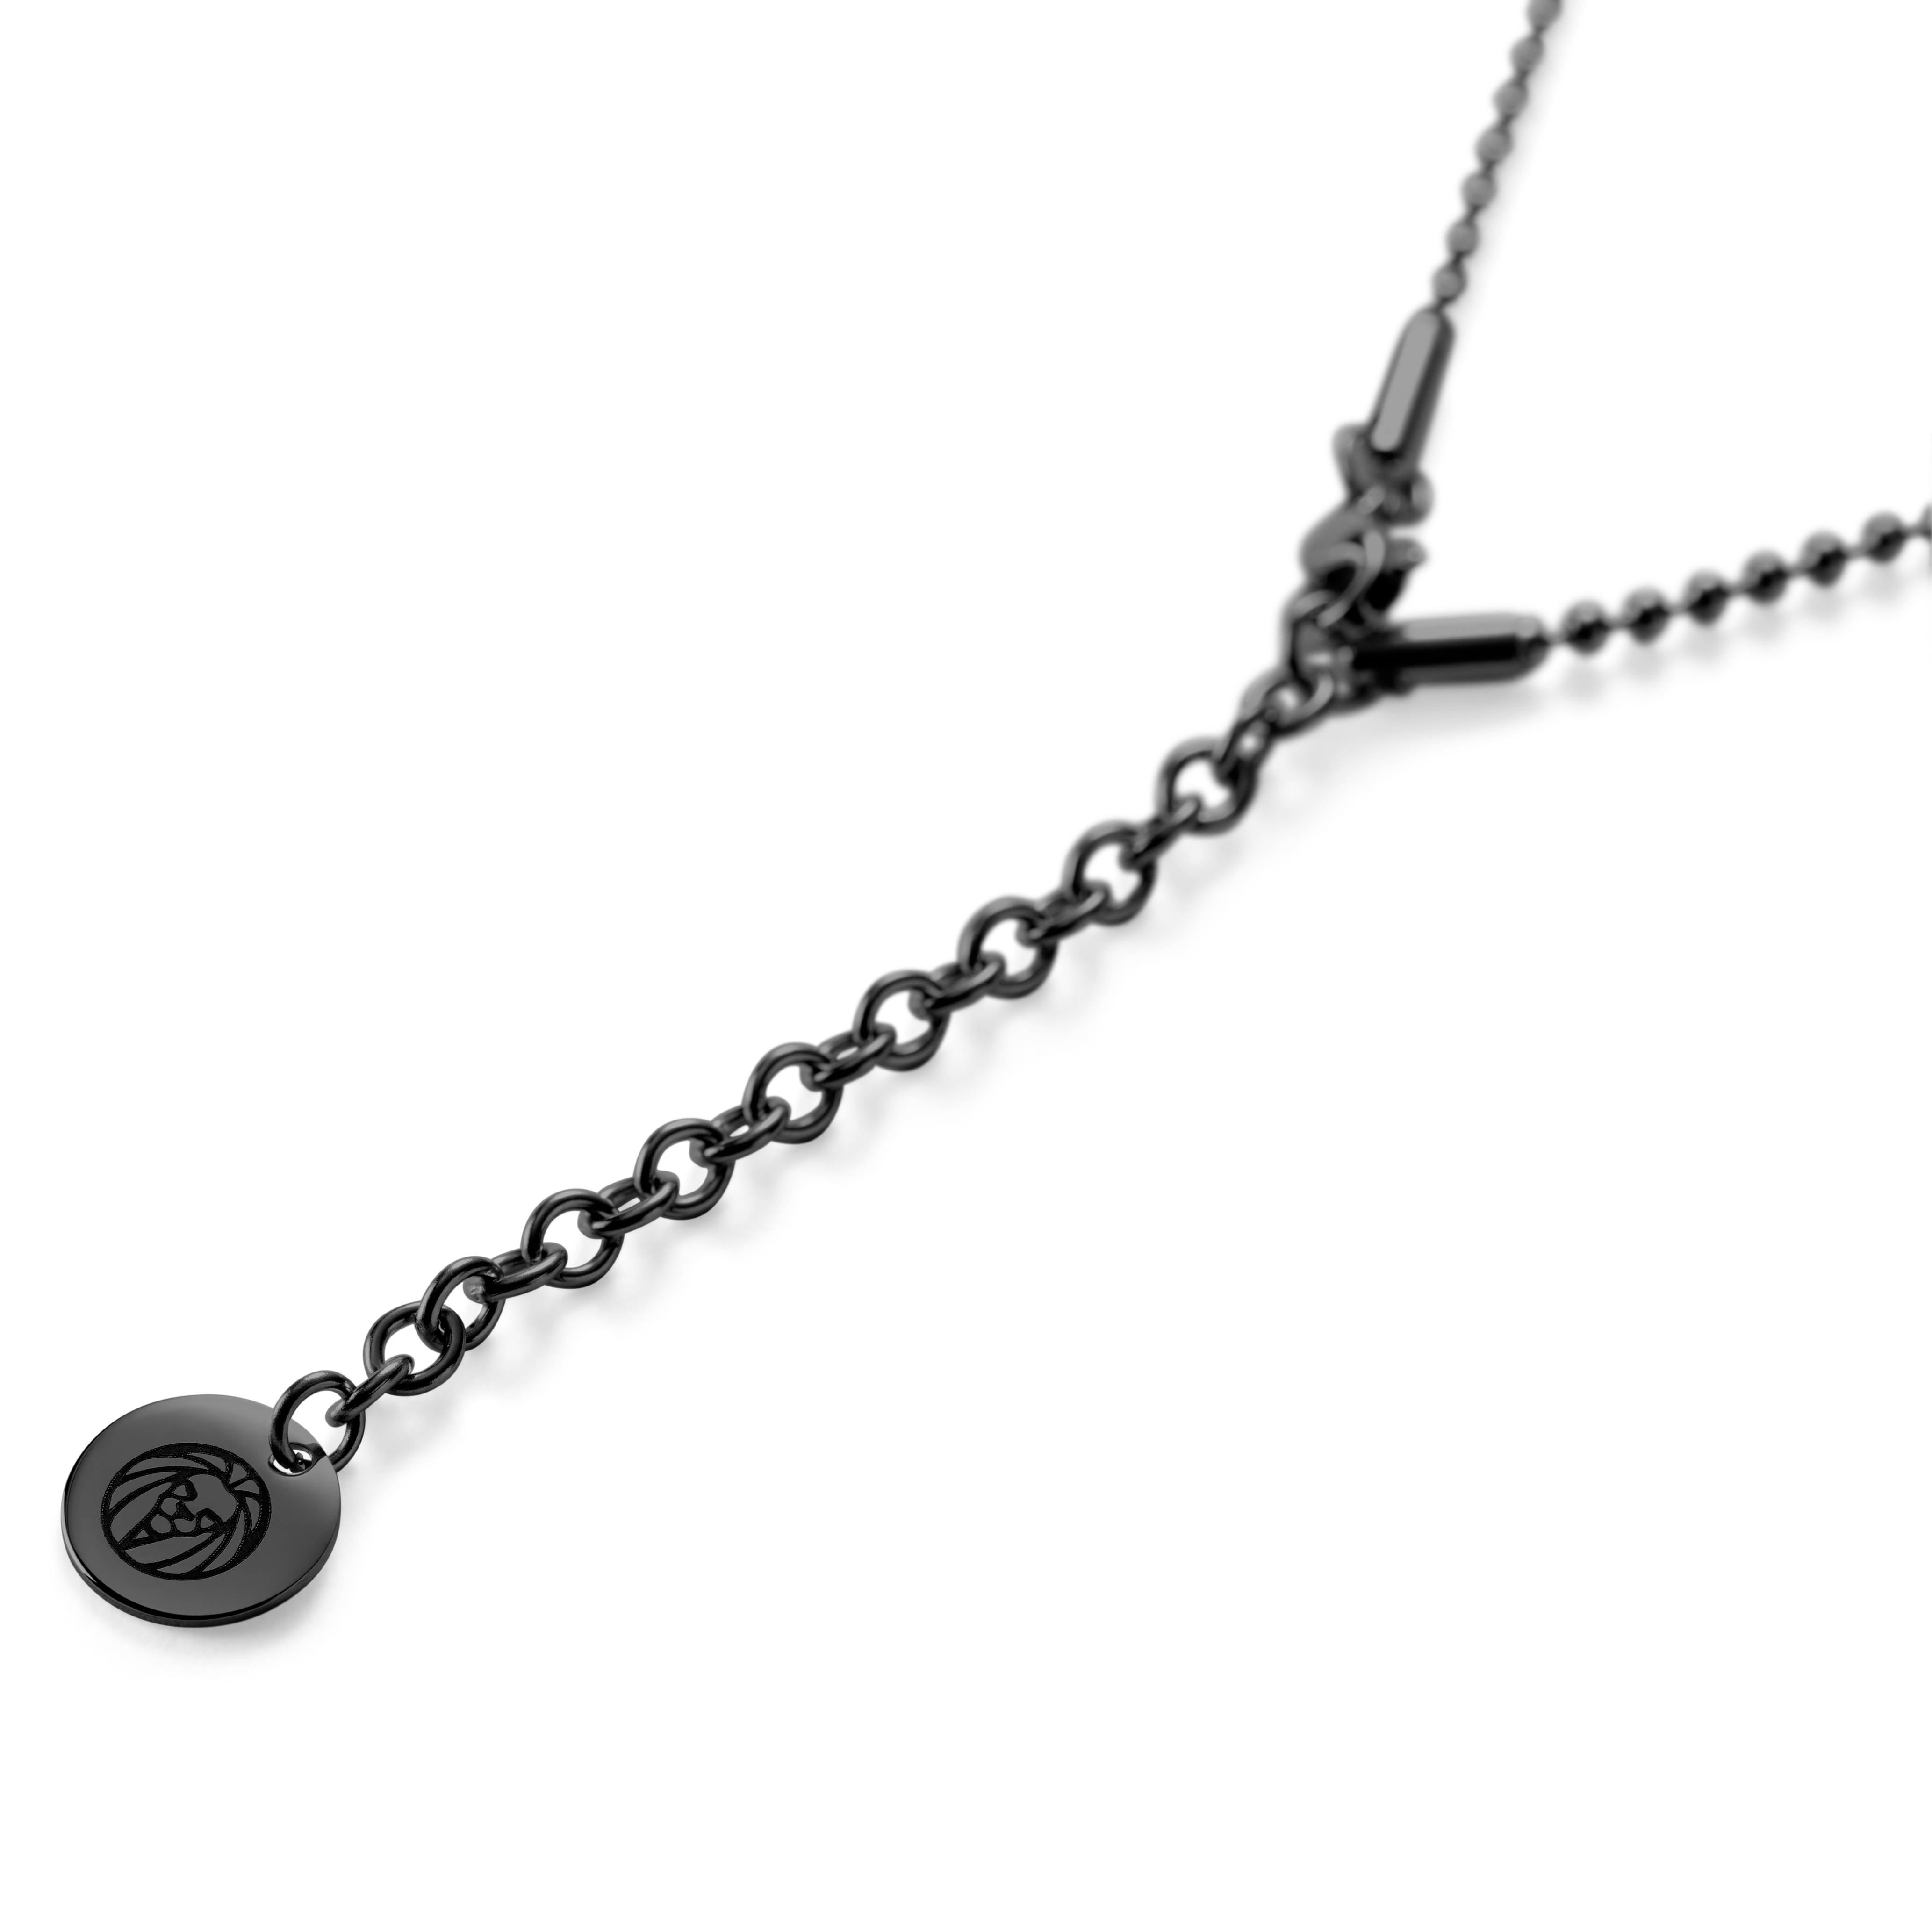 Zillaly Men's Stainless Steel Dog Tag Necklace-Two Color Black and Blue  Hollow Unisex Pendant